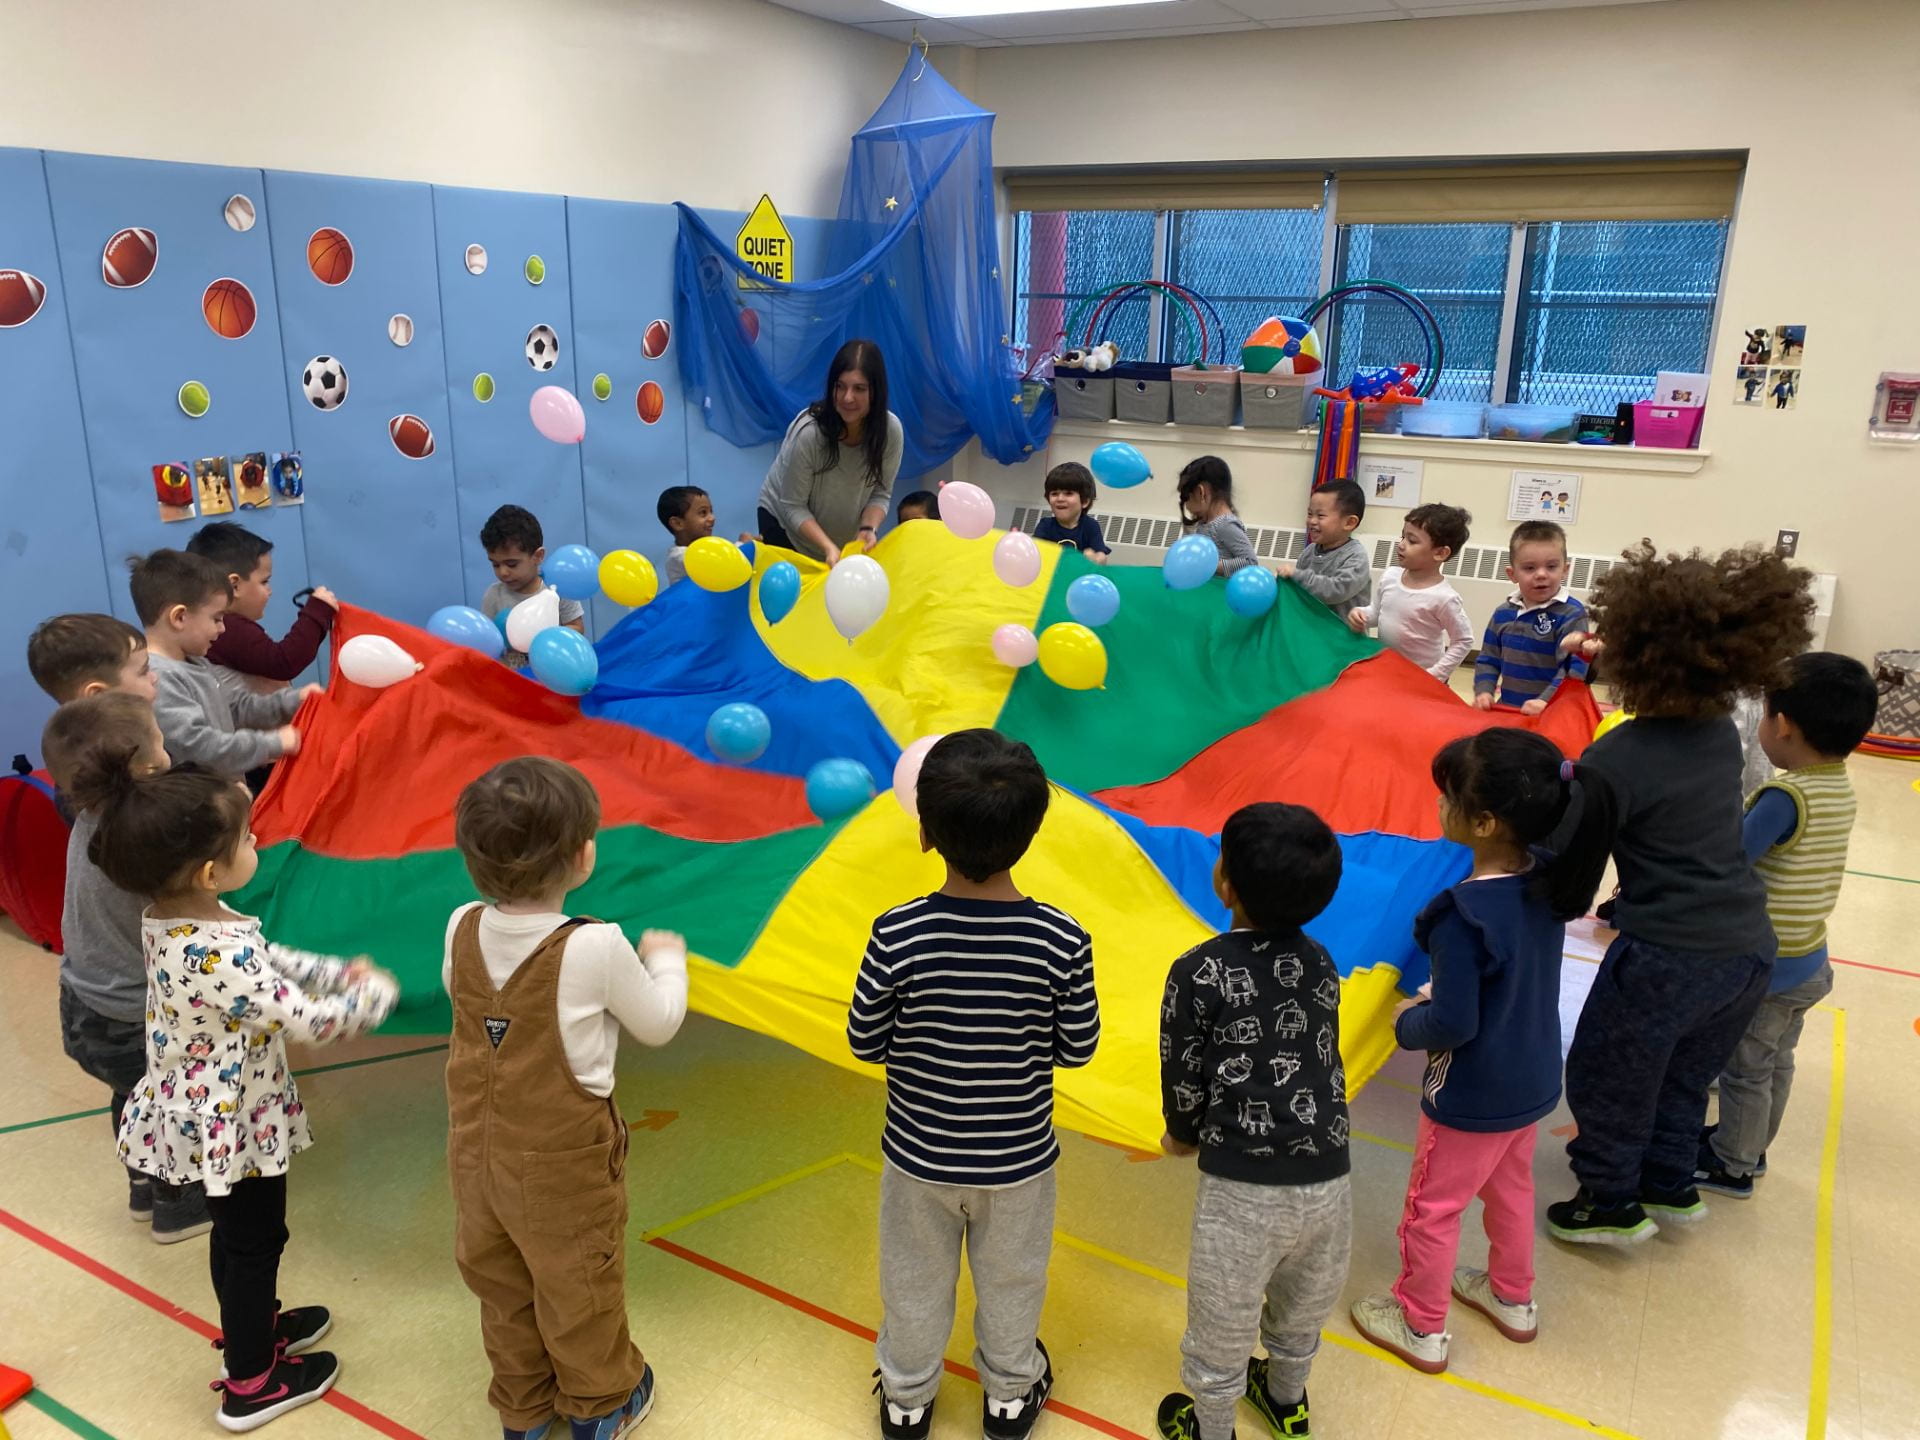 students shaking balloons on a parachute